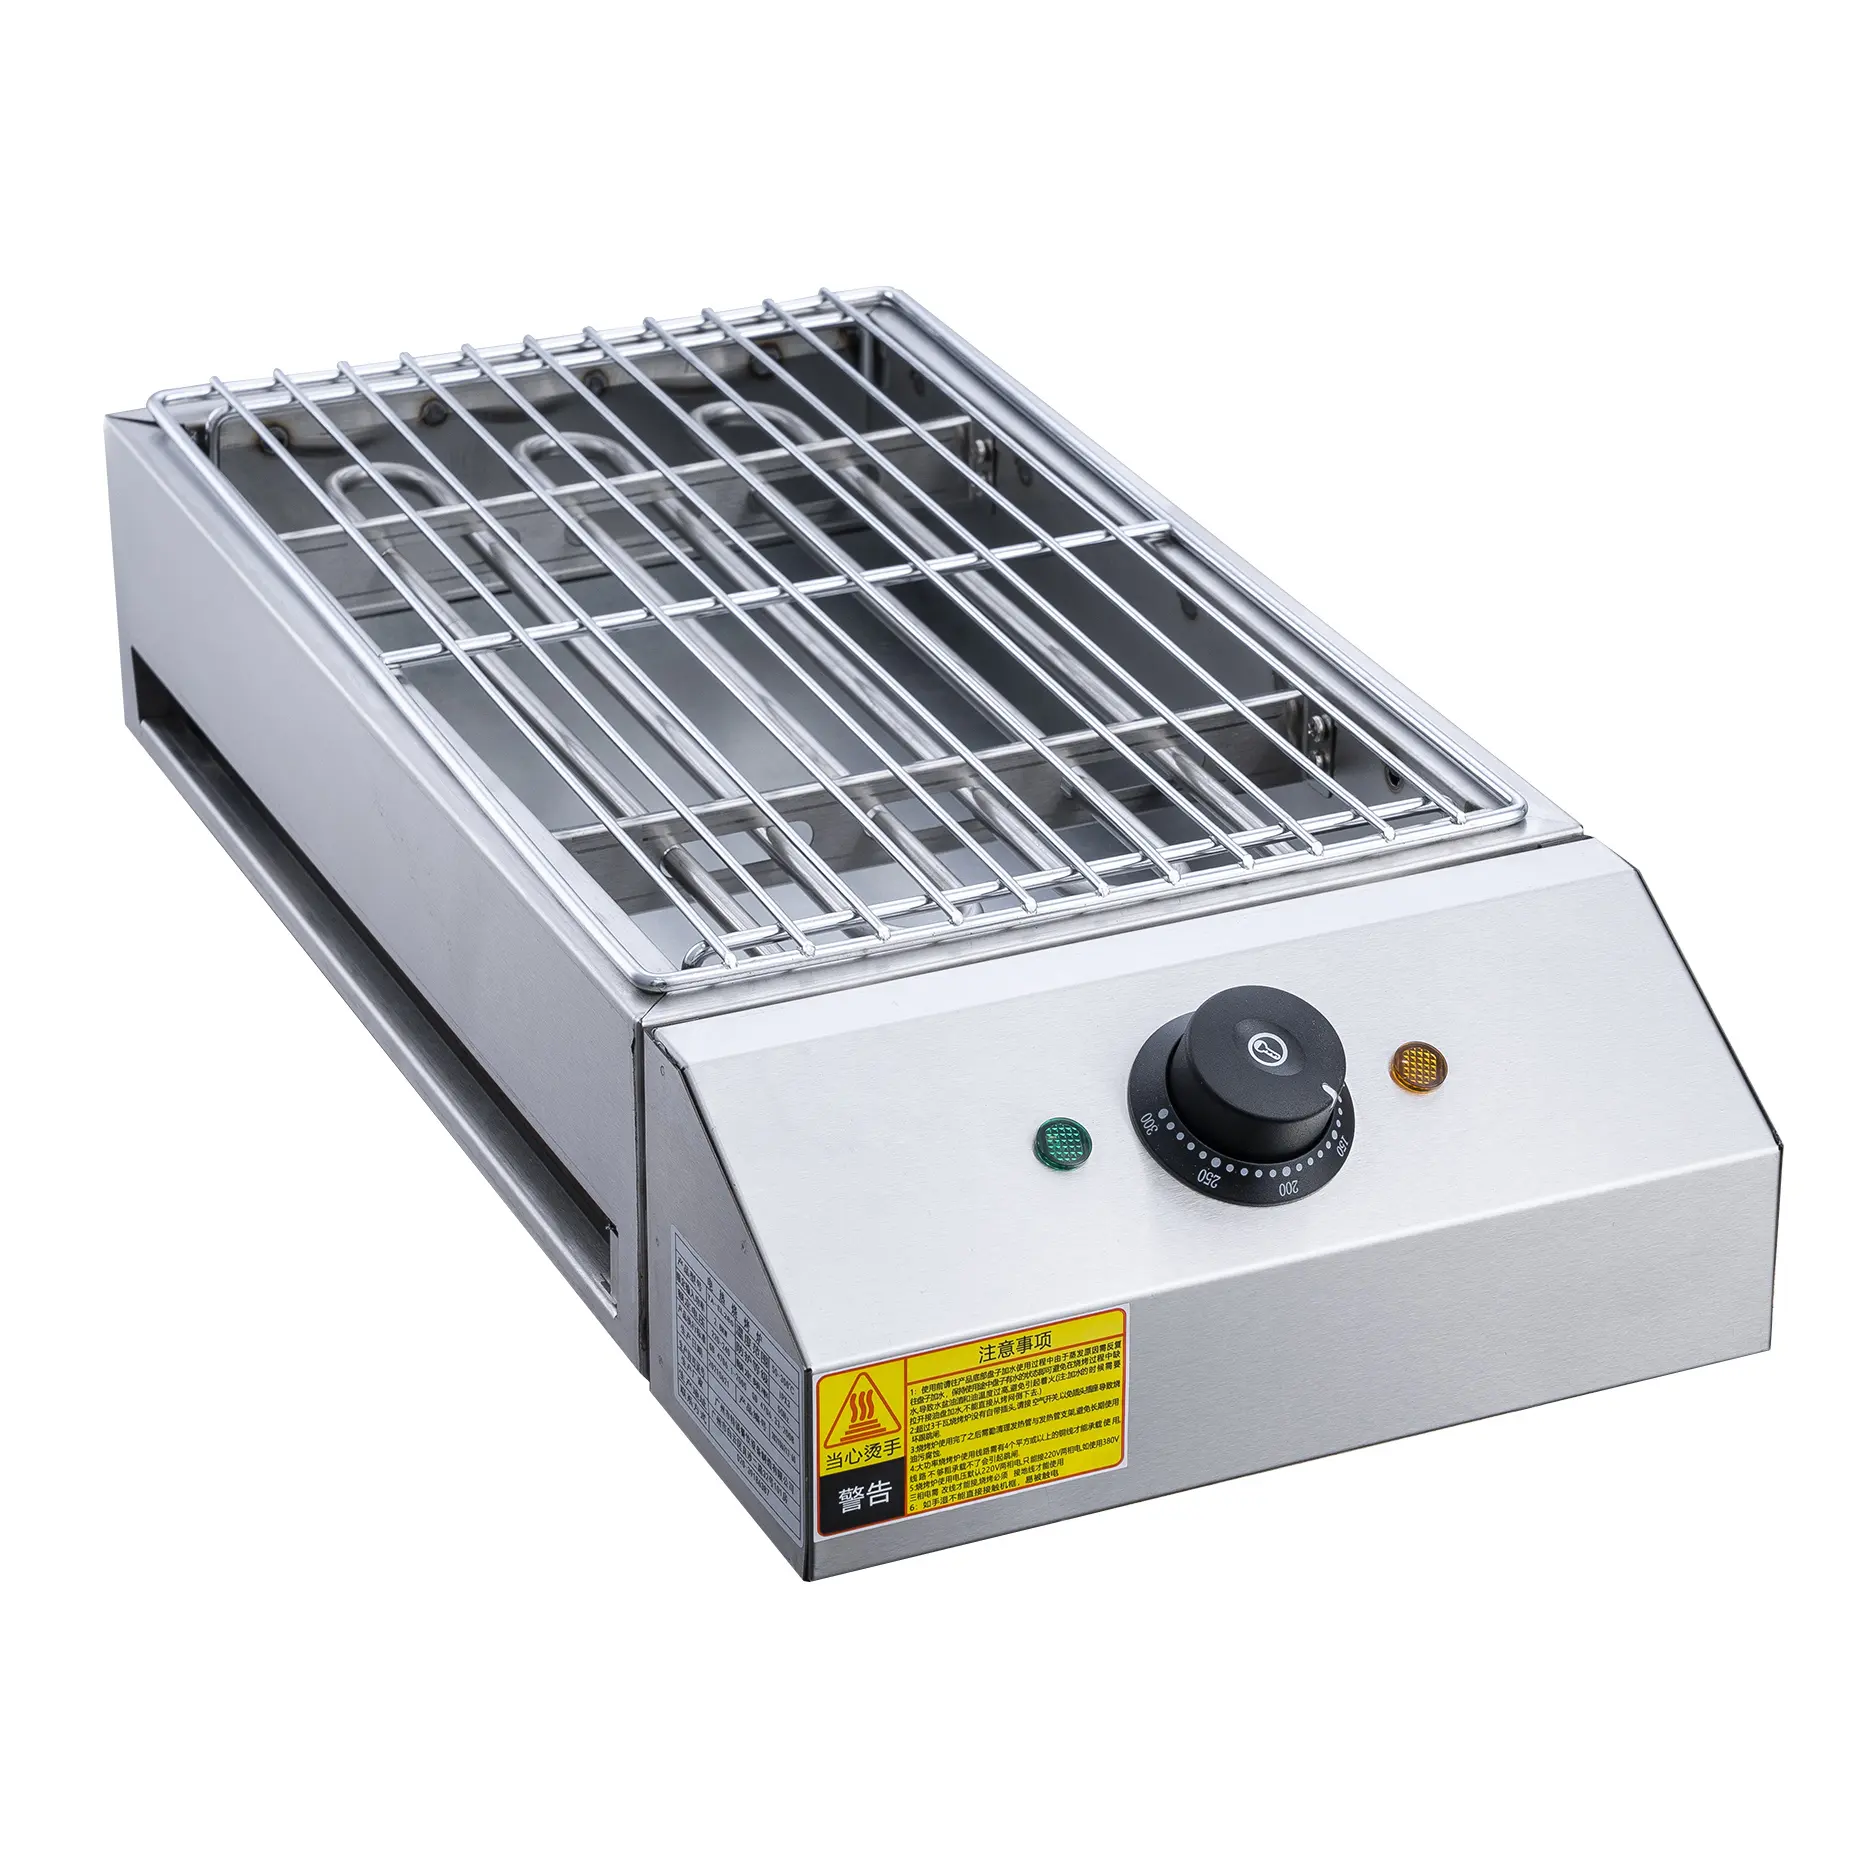 Stainless steel electric BBQ grill portable barbeque roaster electric for meat vegetable roasting machine for shop or home use